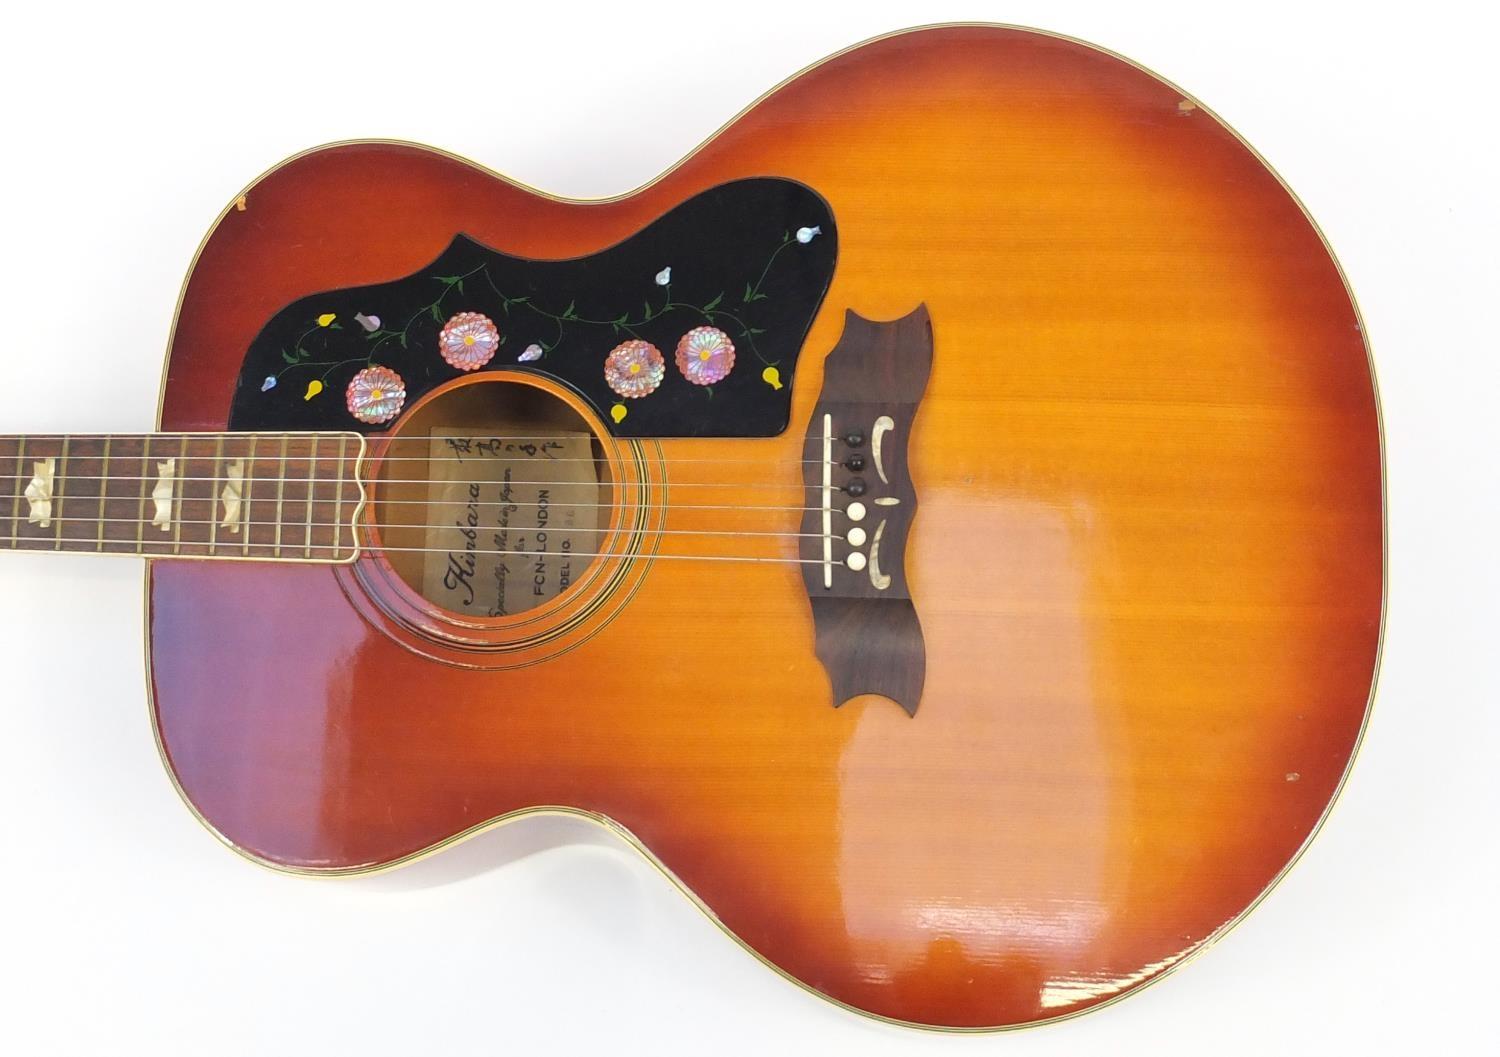 Kambara six string custom acoustic guitar with fitted travelling case, model number 86, 107cm in - Image 7 of 11